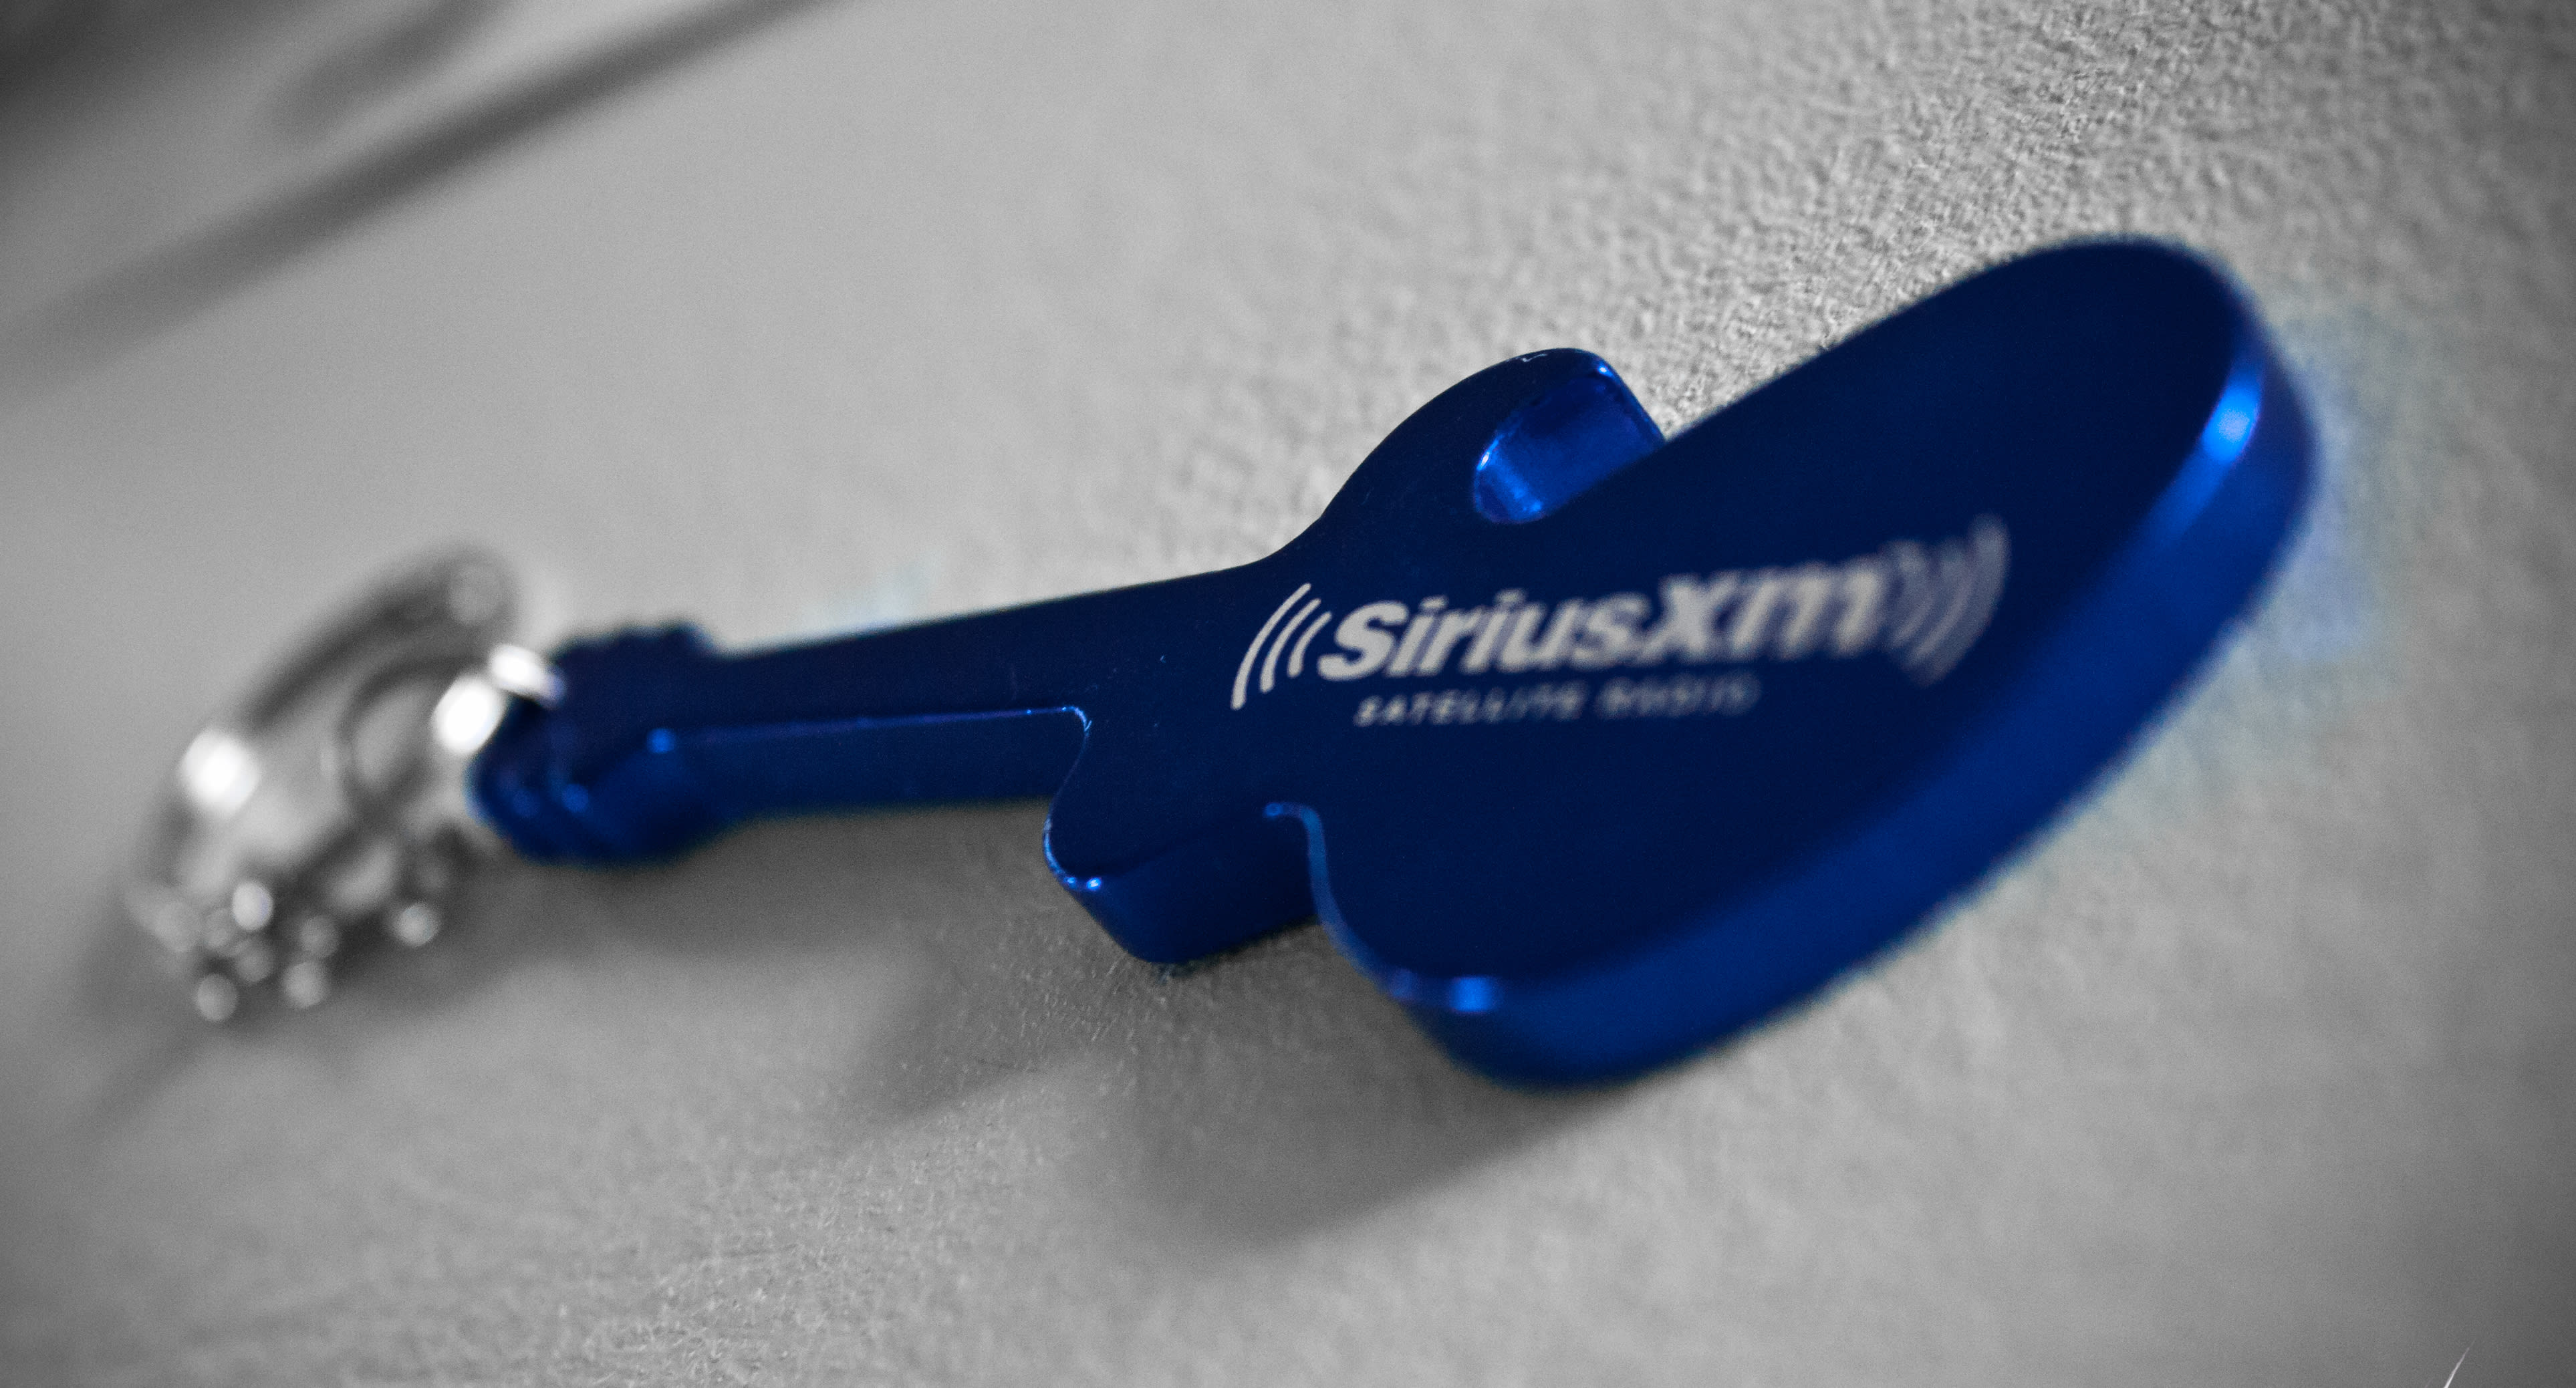 Siriusxm Subscriber Who Bought Lifetime Subscription Files Class Action